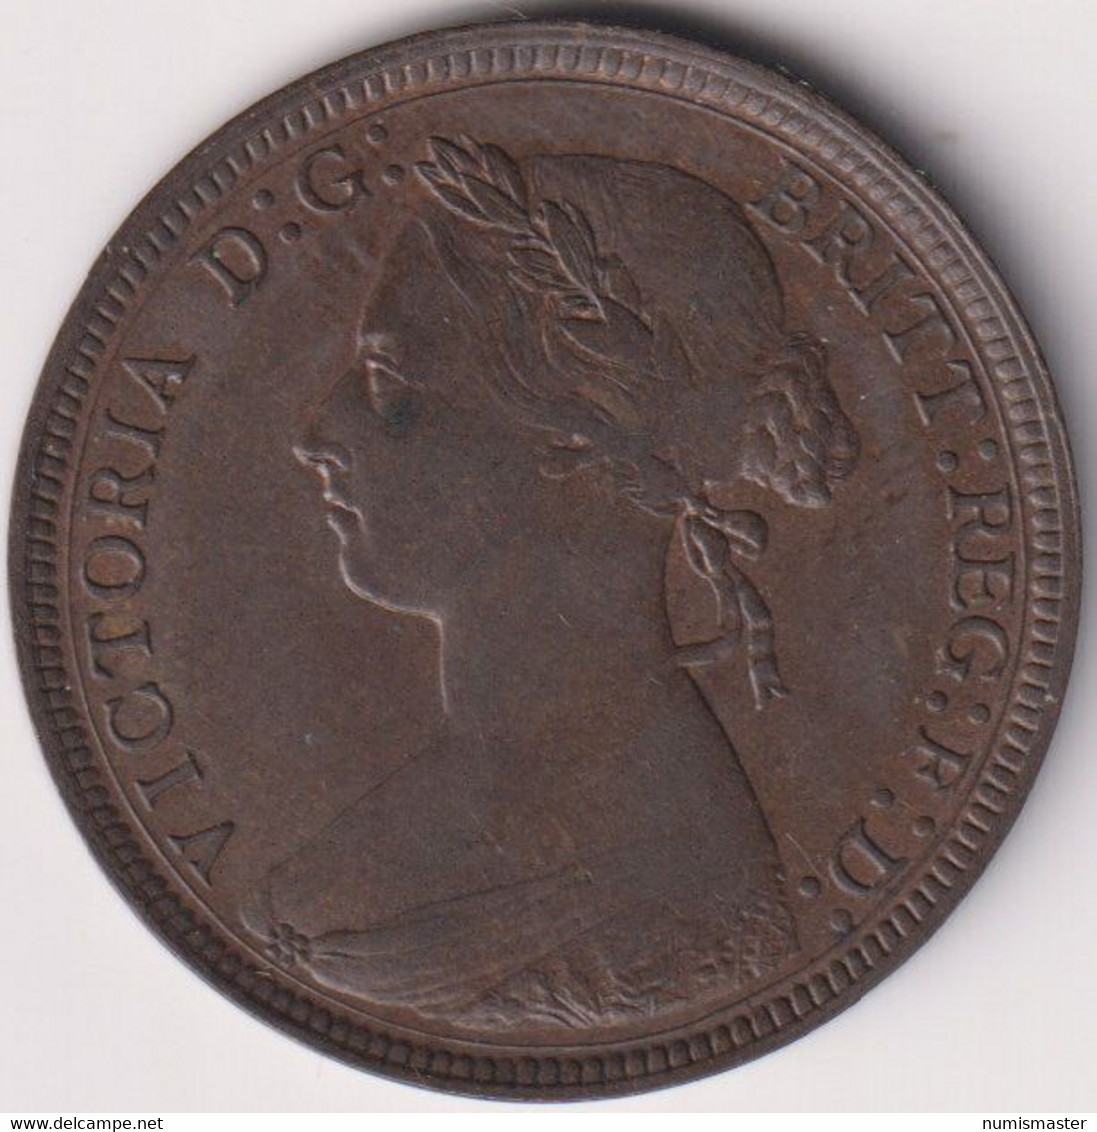 GREAT BRITAIN , 1/2 PENNY 1885 - C. 1/2 Penny